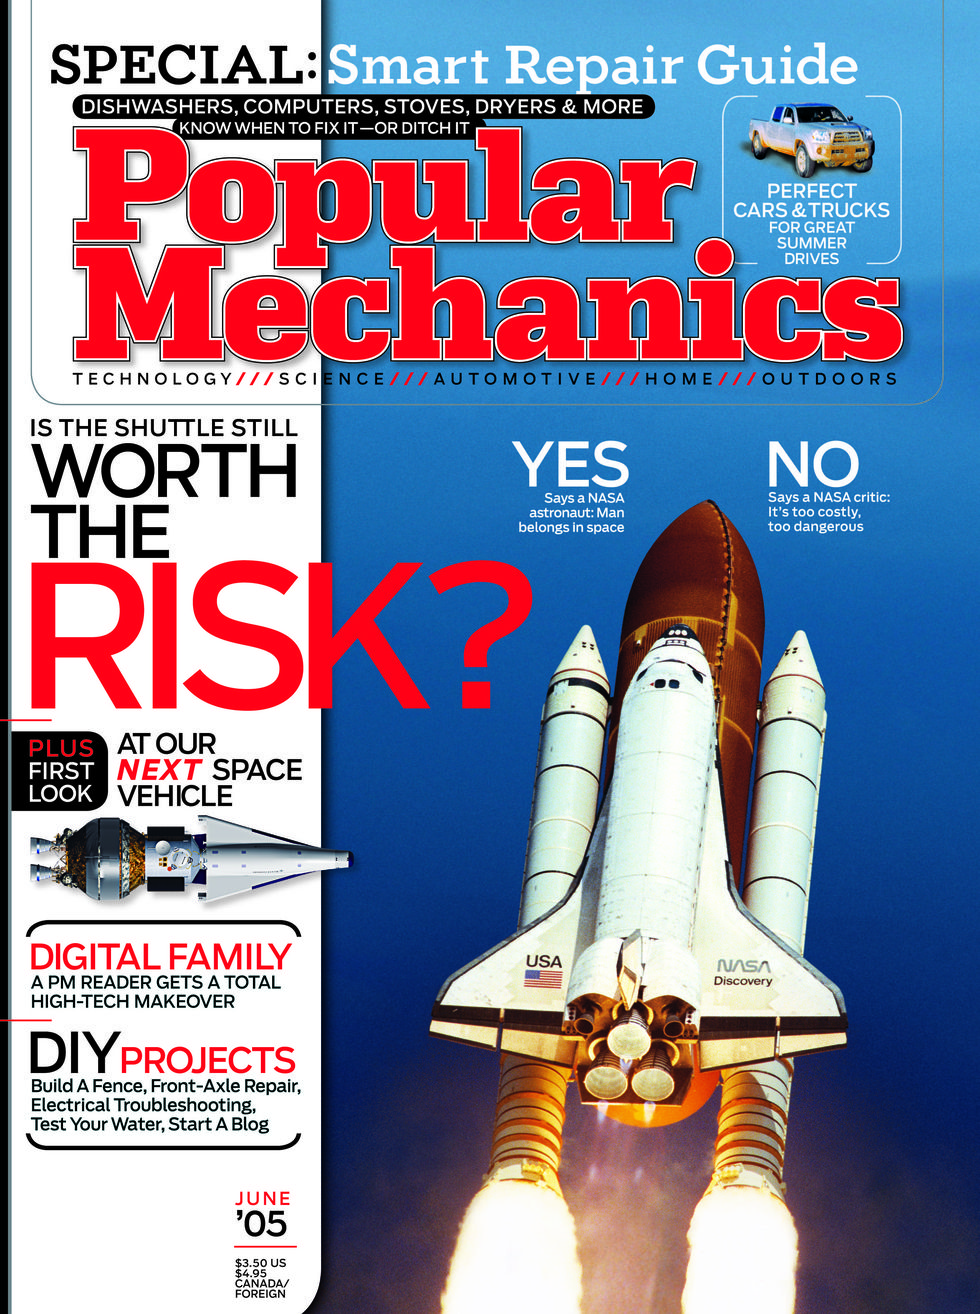 Popular Mechanics - Product Reviews, How-To, Space, Military, Math,  Science, and New Technology